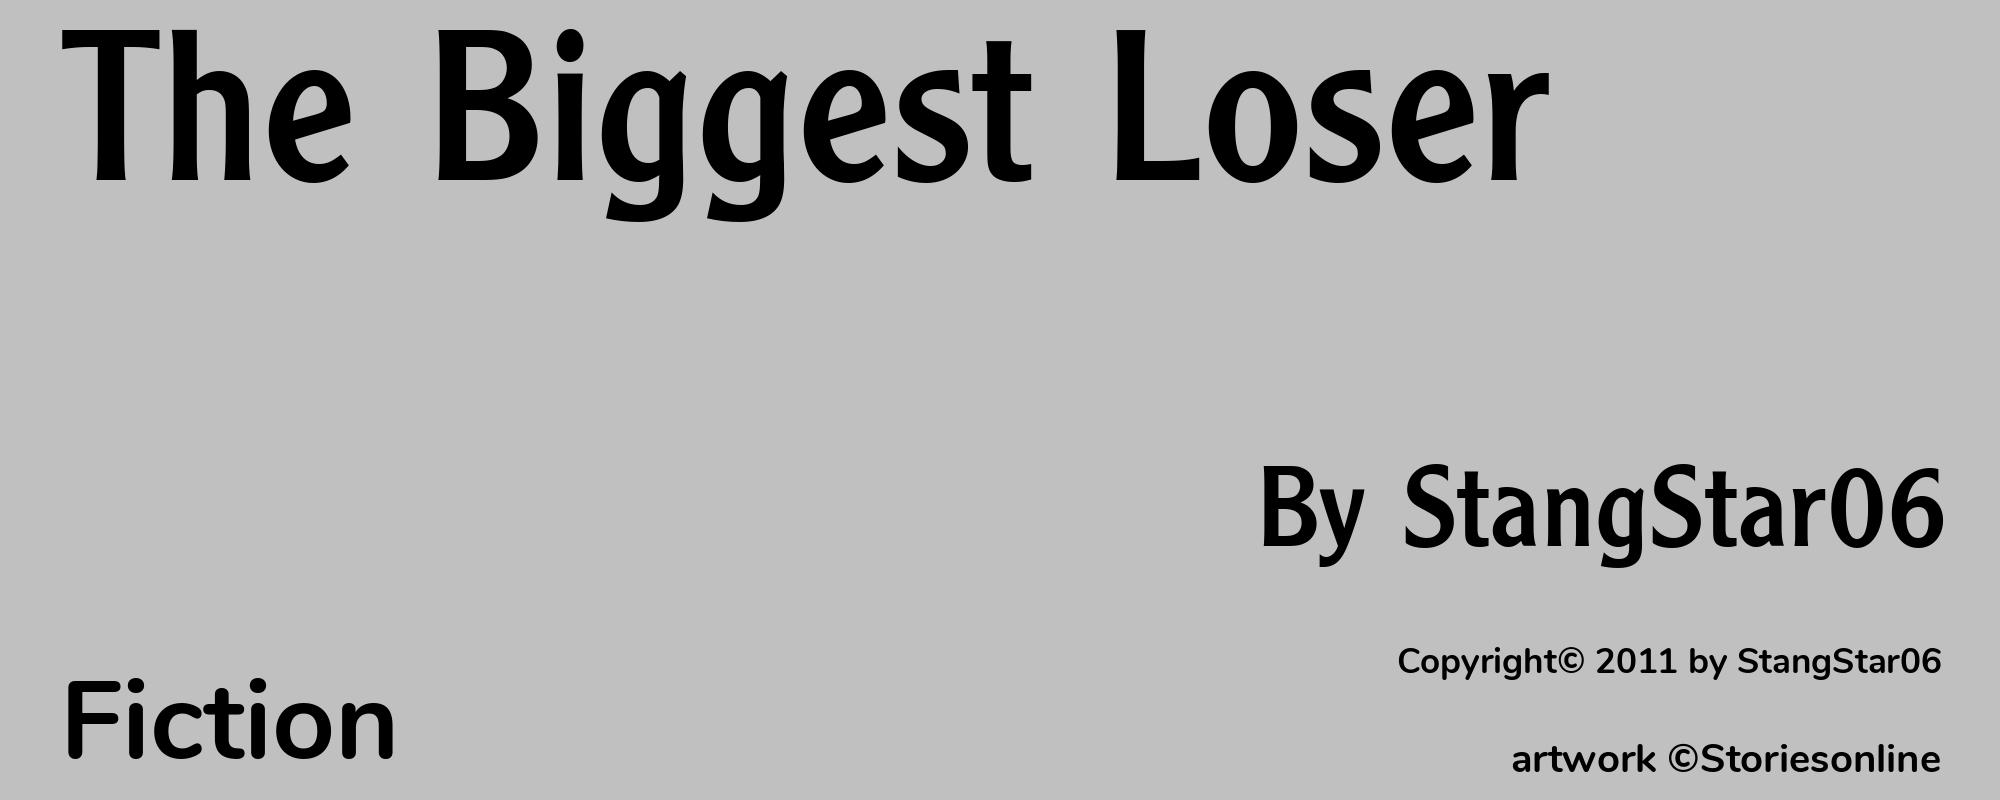 The Biggest Loser - Cover